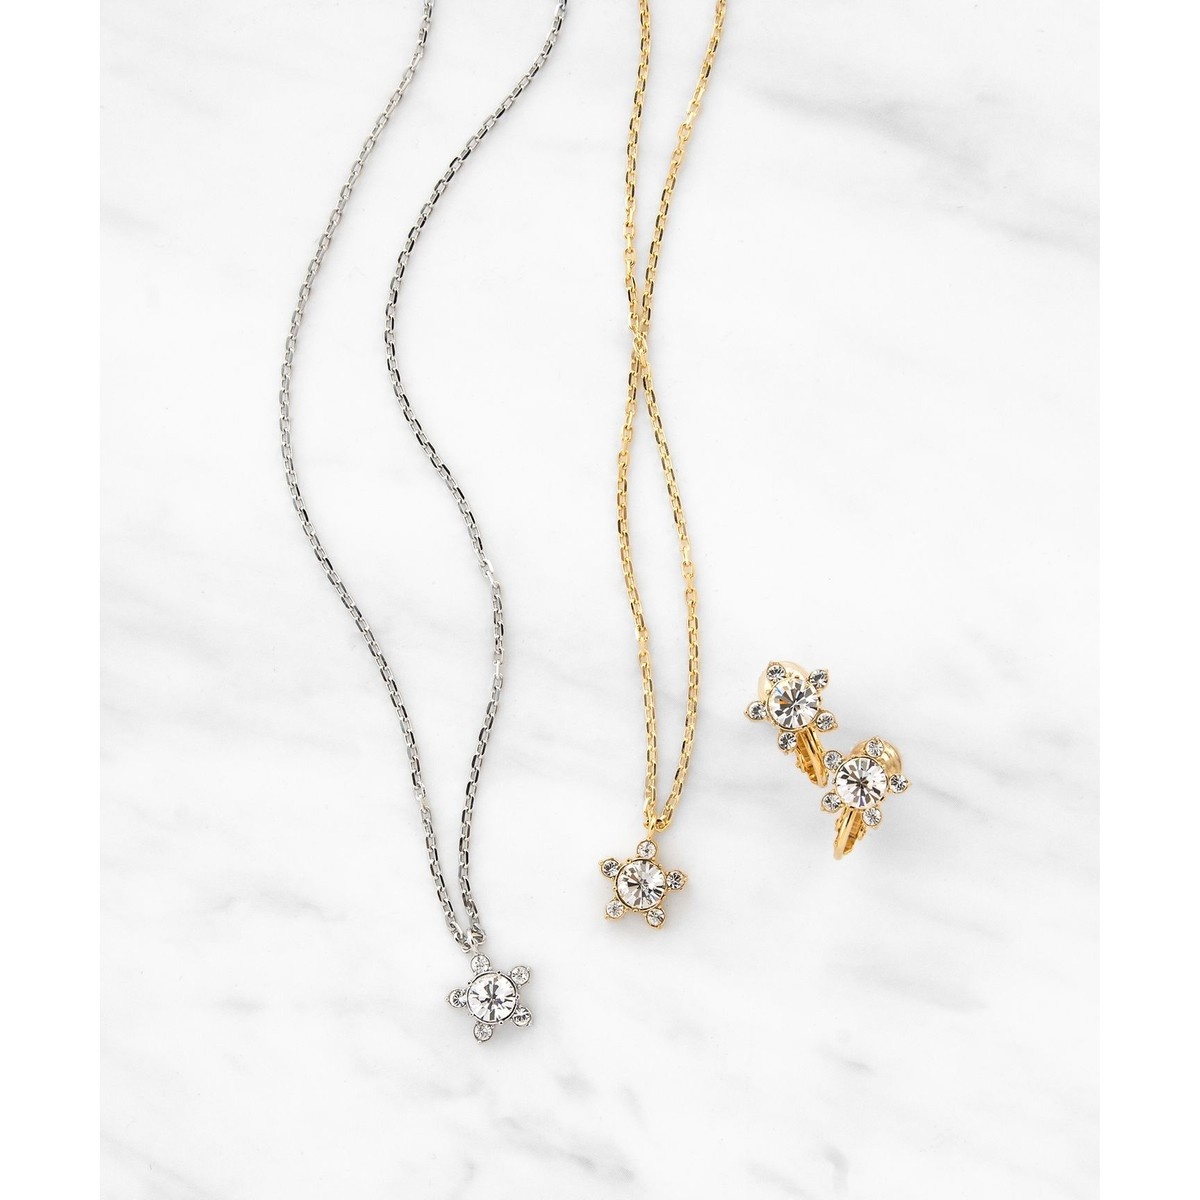 PETITE ETOILE NECKLACE ネックレス | トッカ(TOCCA) | ASTZSW0350